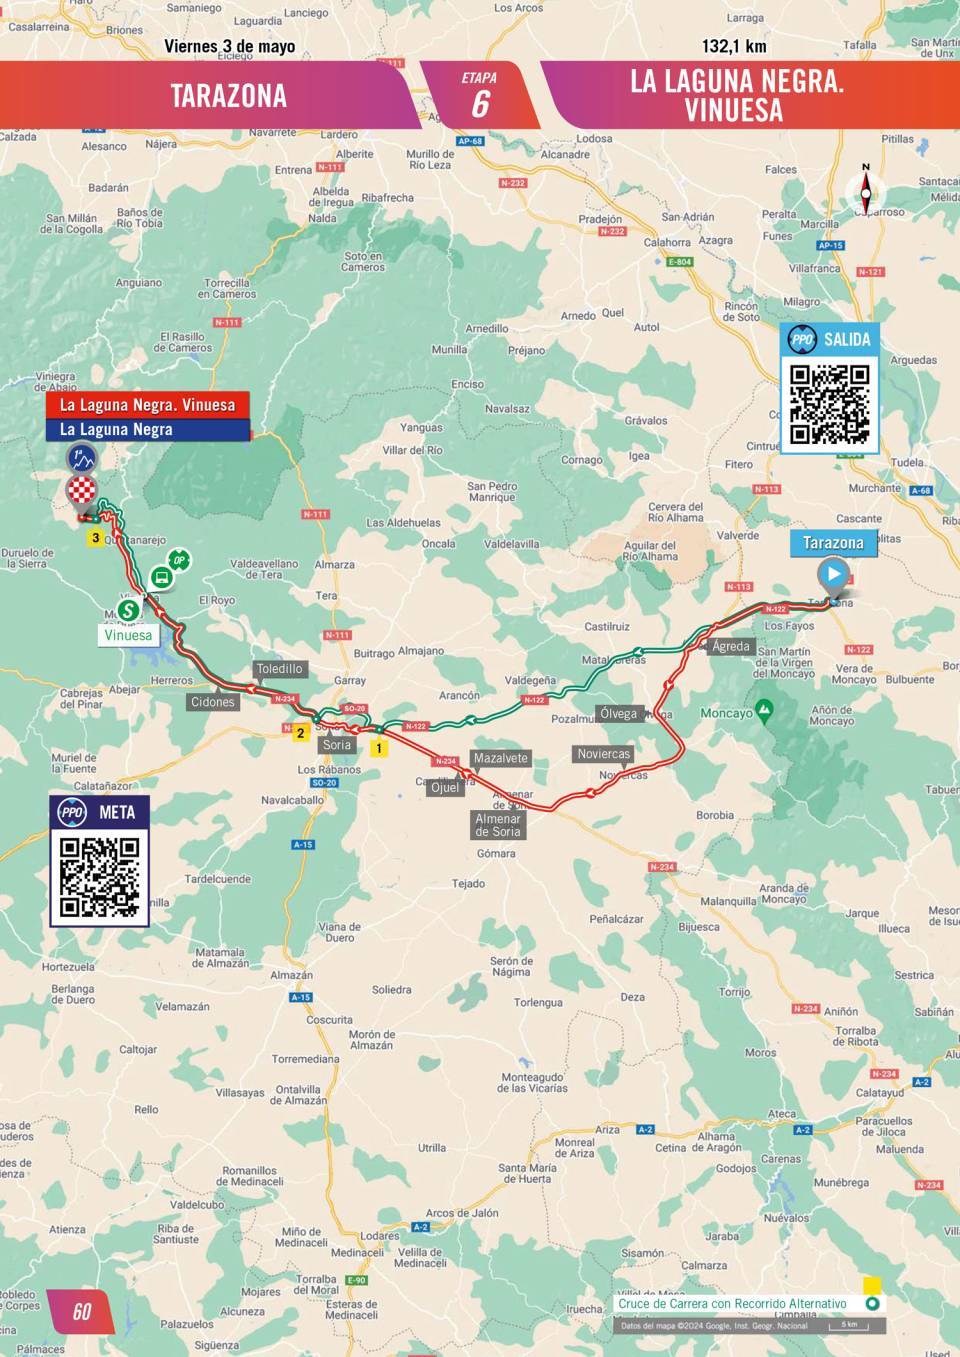 The route of stage 6 of La Vuelta Femenina. After the start in Tarazona the race describes a lazy southward curve before trending back north on its westerly run to the finish atop La Laguna Negra.